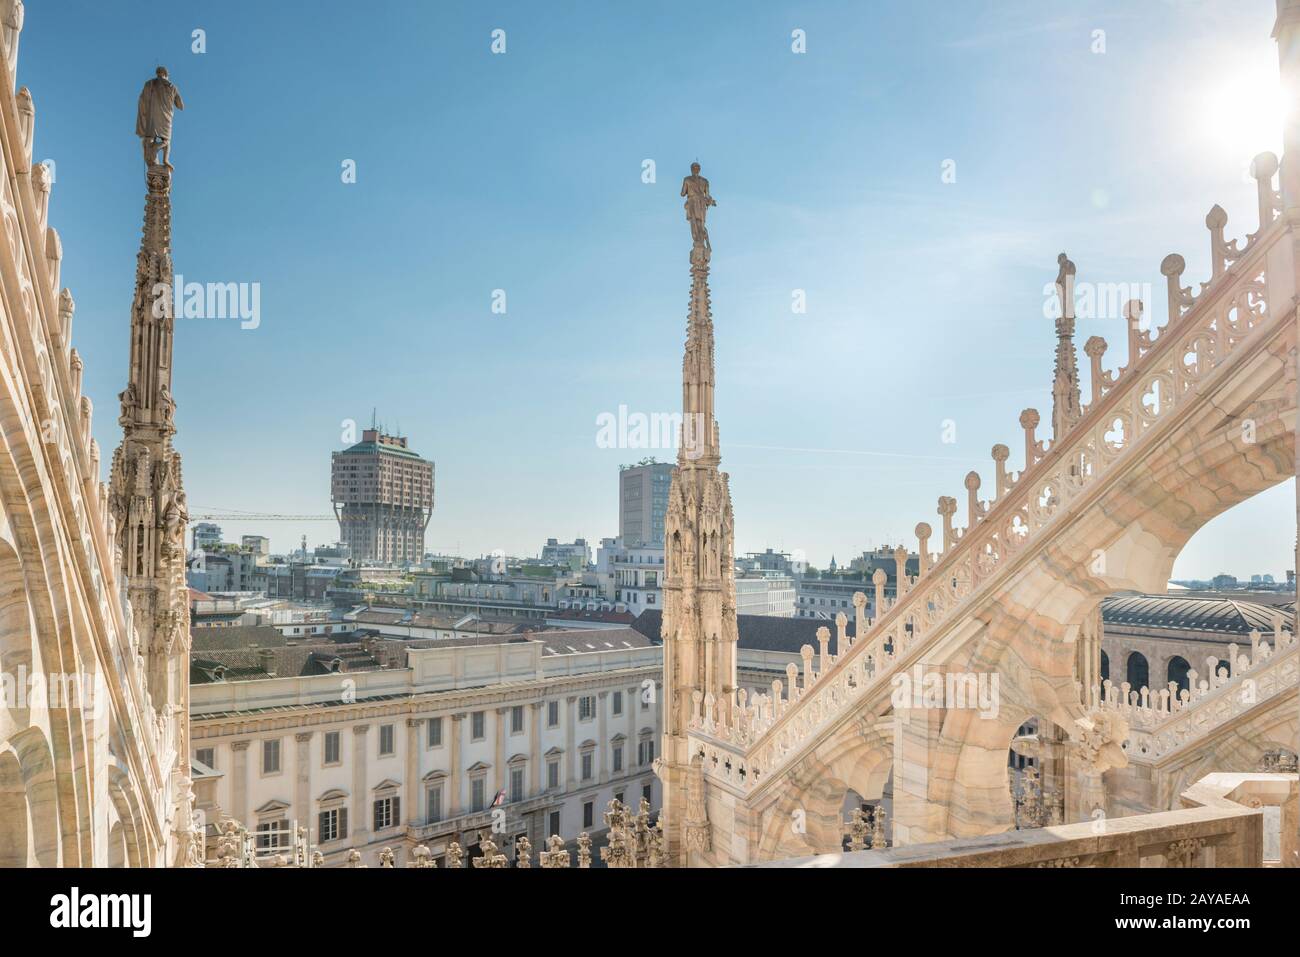 View from roof of Duomo to spires with statues and sity of Milan Stock Photo